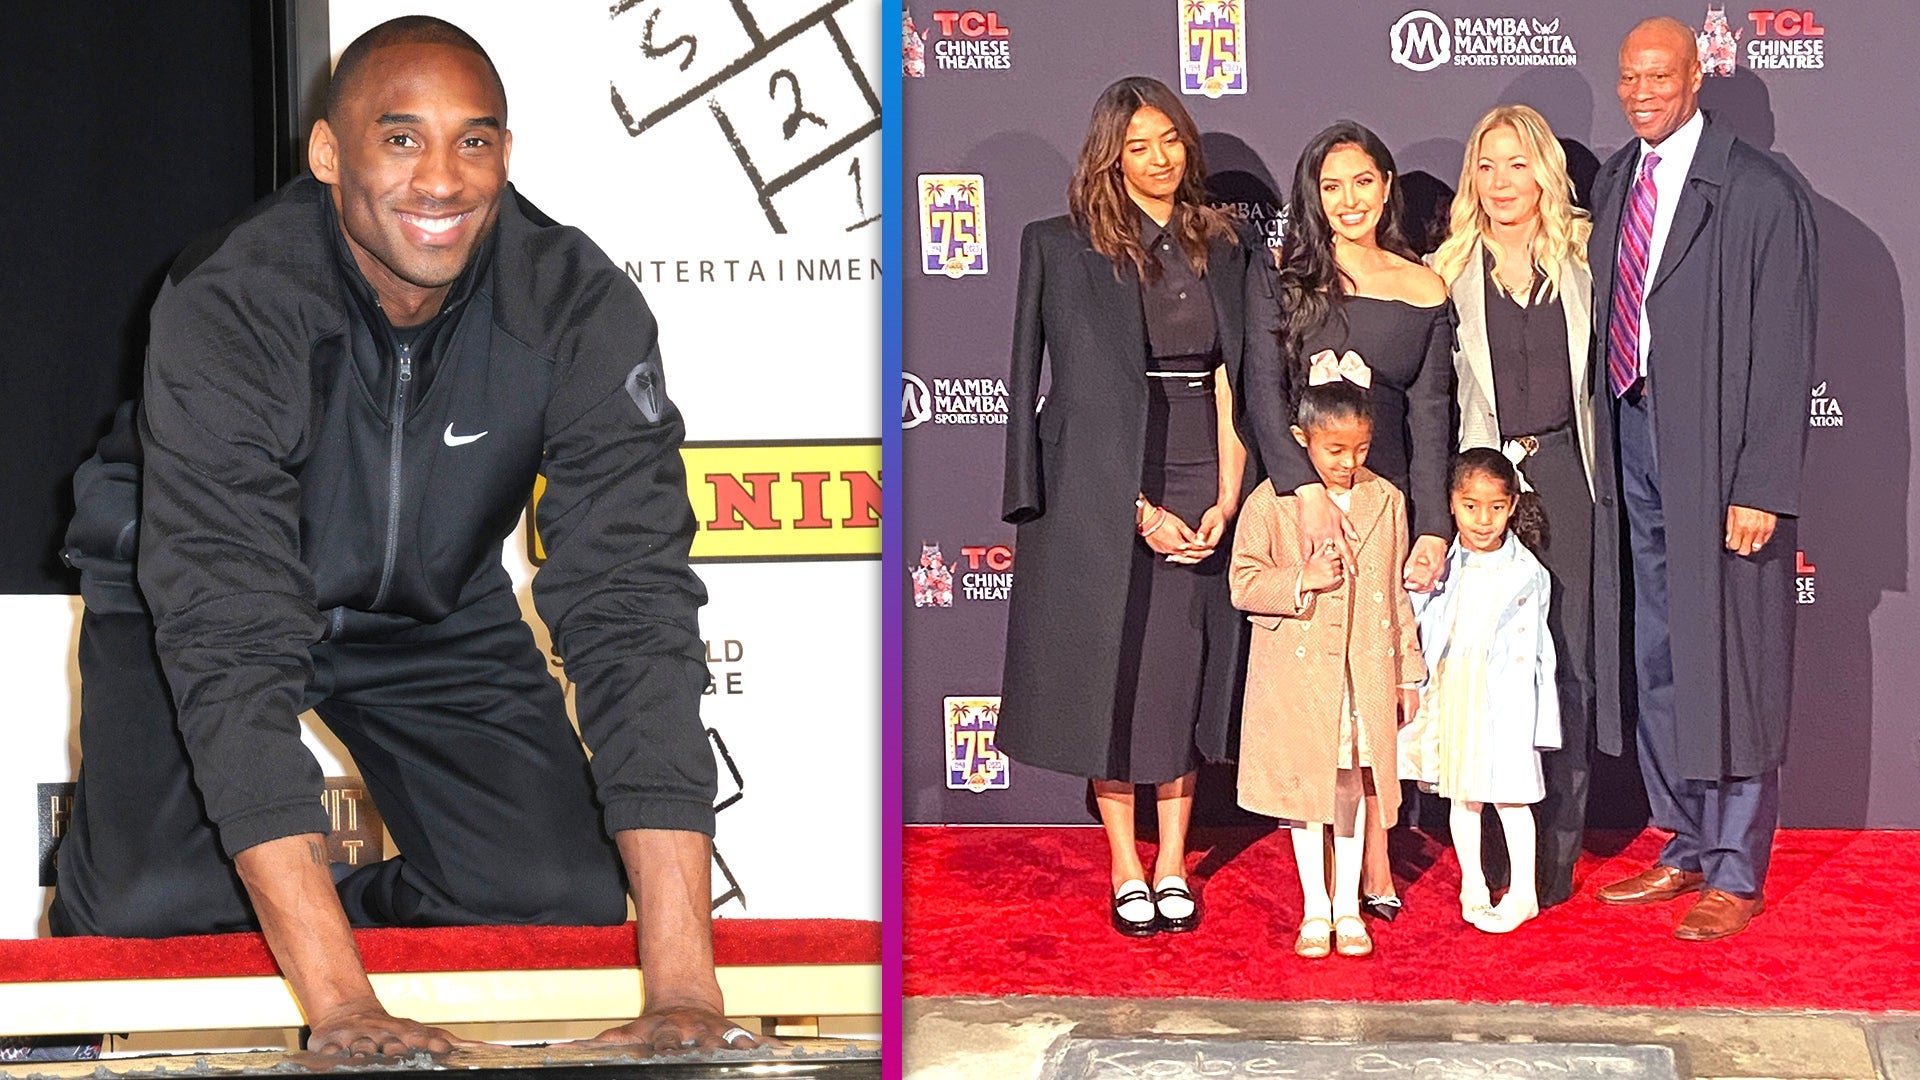 it was rare to see kobe bryant get a DNP, but here's some outfits